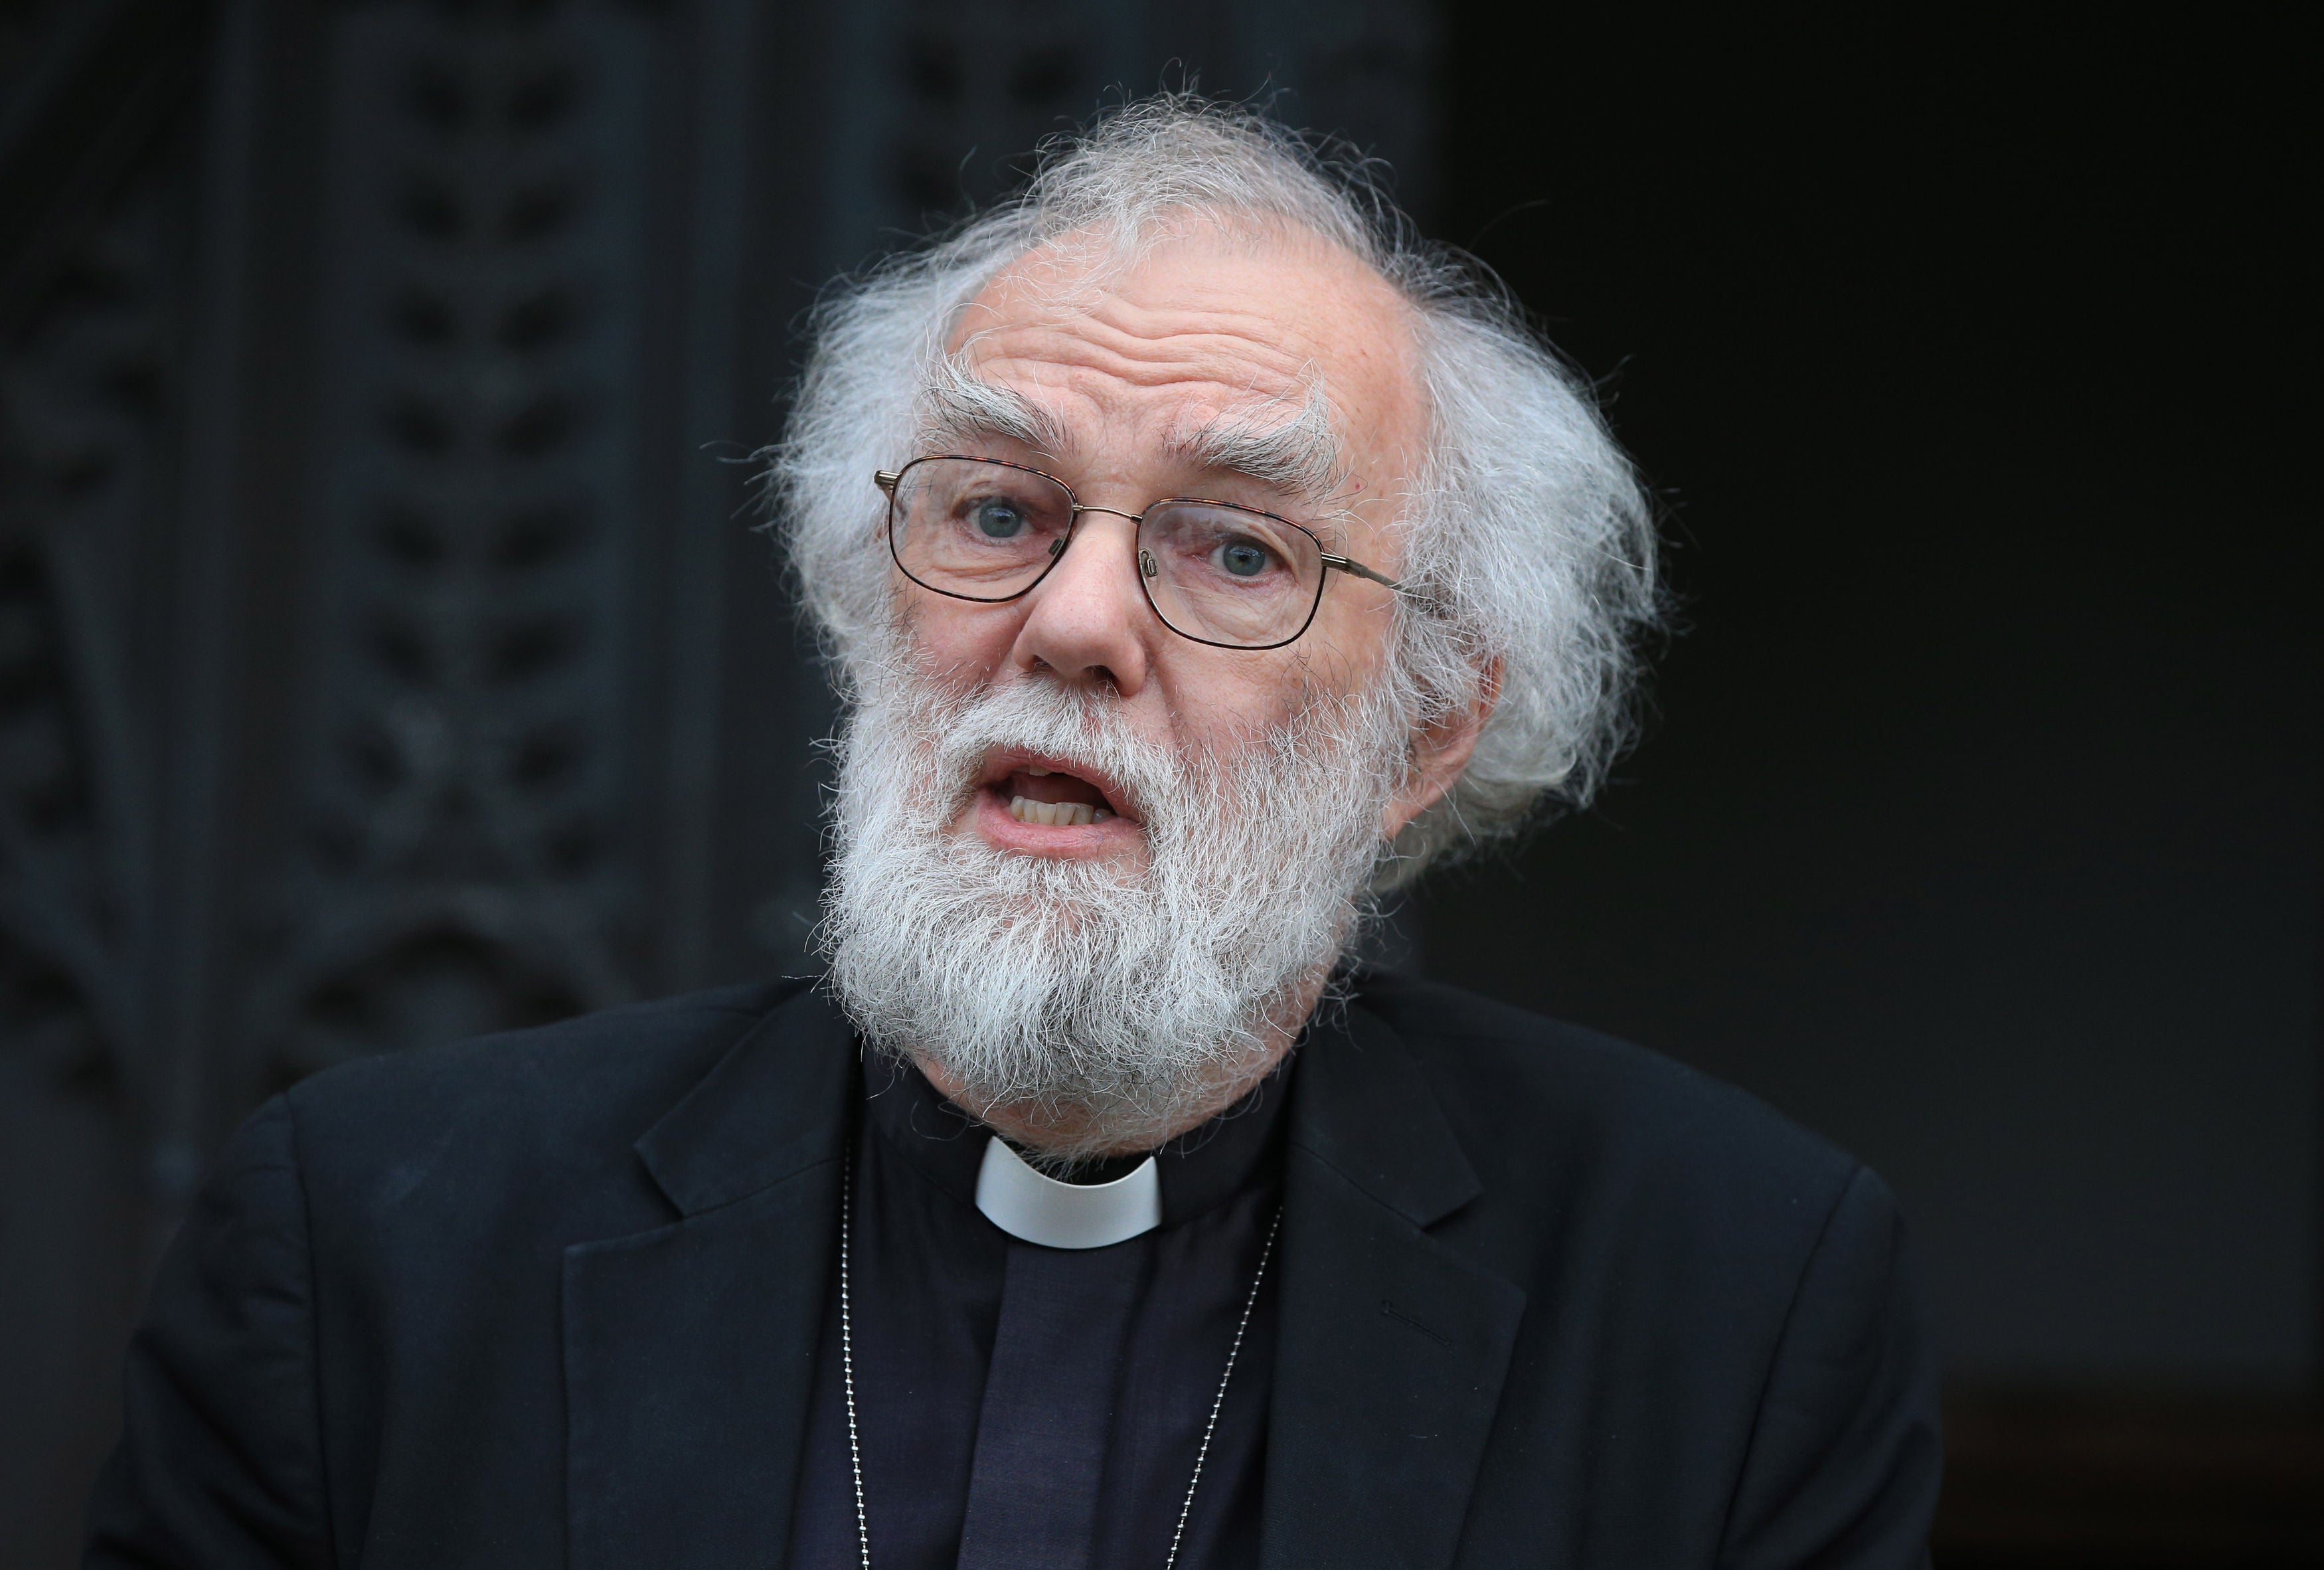 Former Archbishop of Canterbury Dr Rowan Williams is among signatories to a letter to the PM regarding trans people and a ban on conversion therapy (Jonathan Brady/PA)